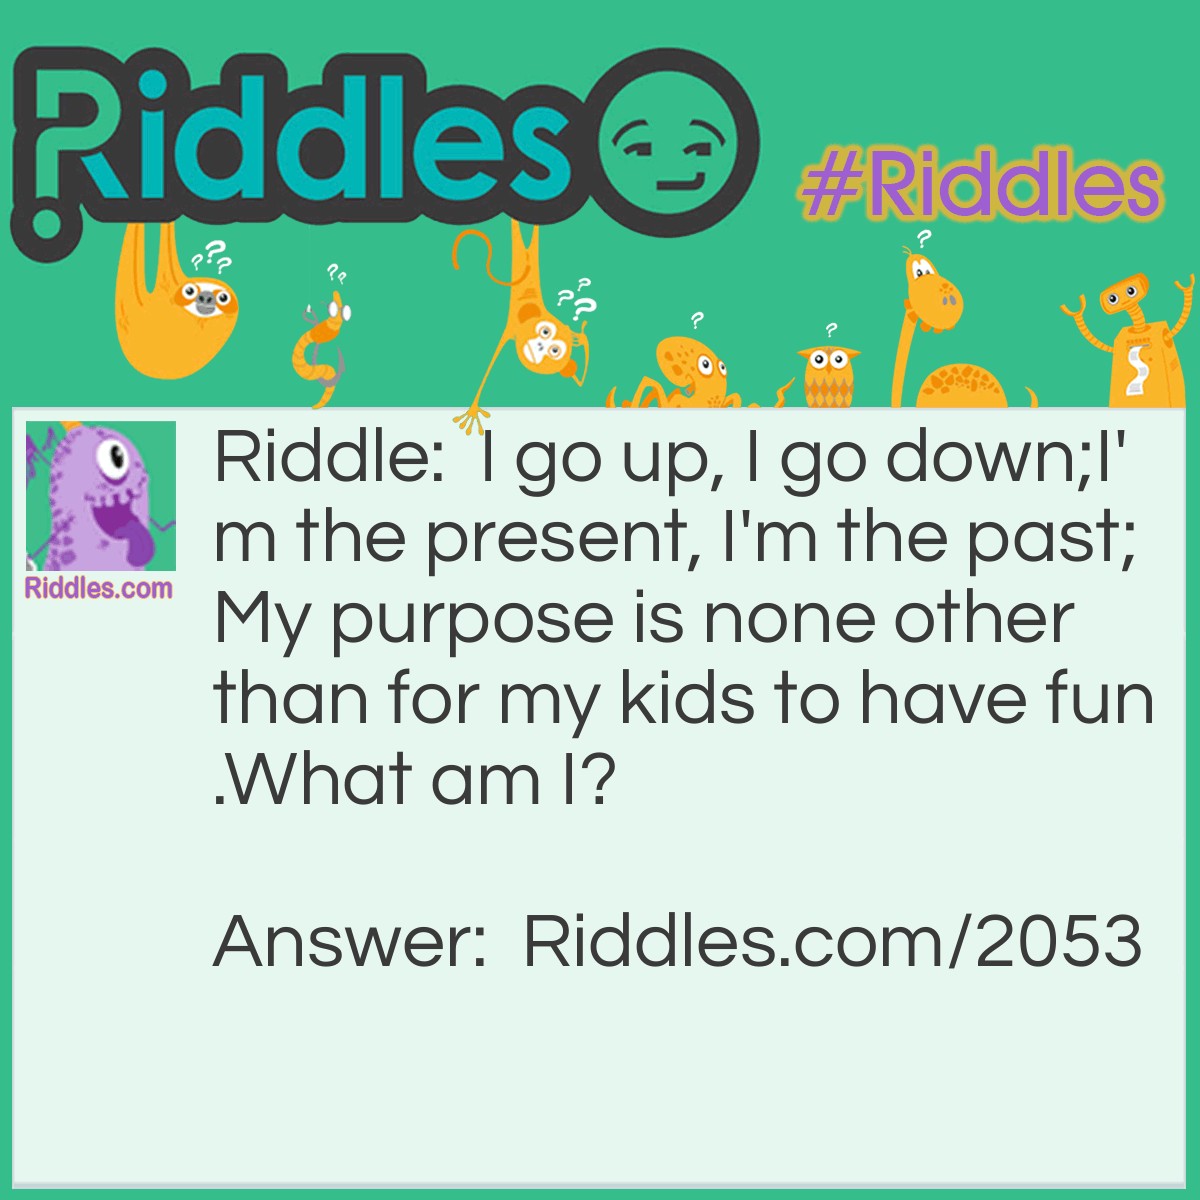 Riddle: I go up, I go down;I'm the present, I'm the past;My purpose is none other than for my <a title="Riddles For Kids" href="https://www.riddles.com/riddles-for-kids">kids to have fun</a>.What am I? Answer: A See-Saw.